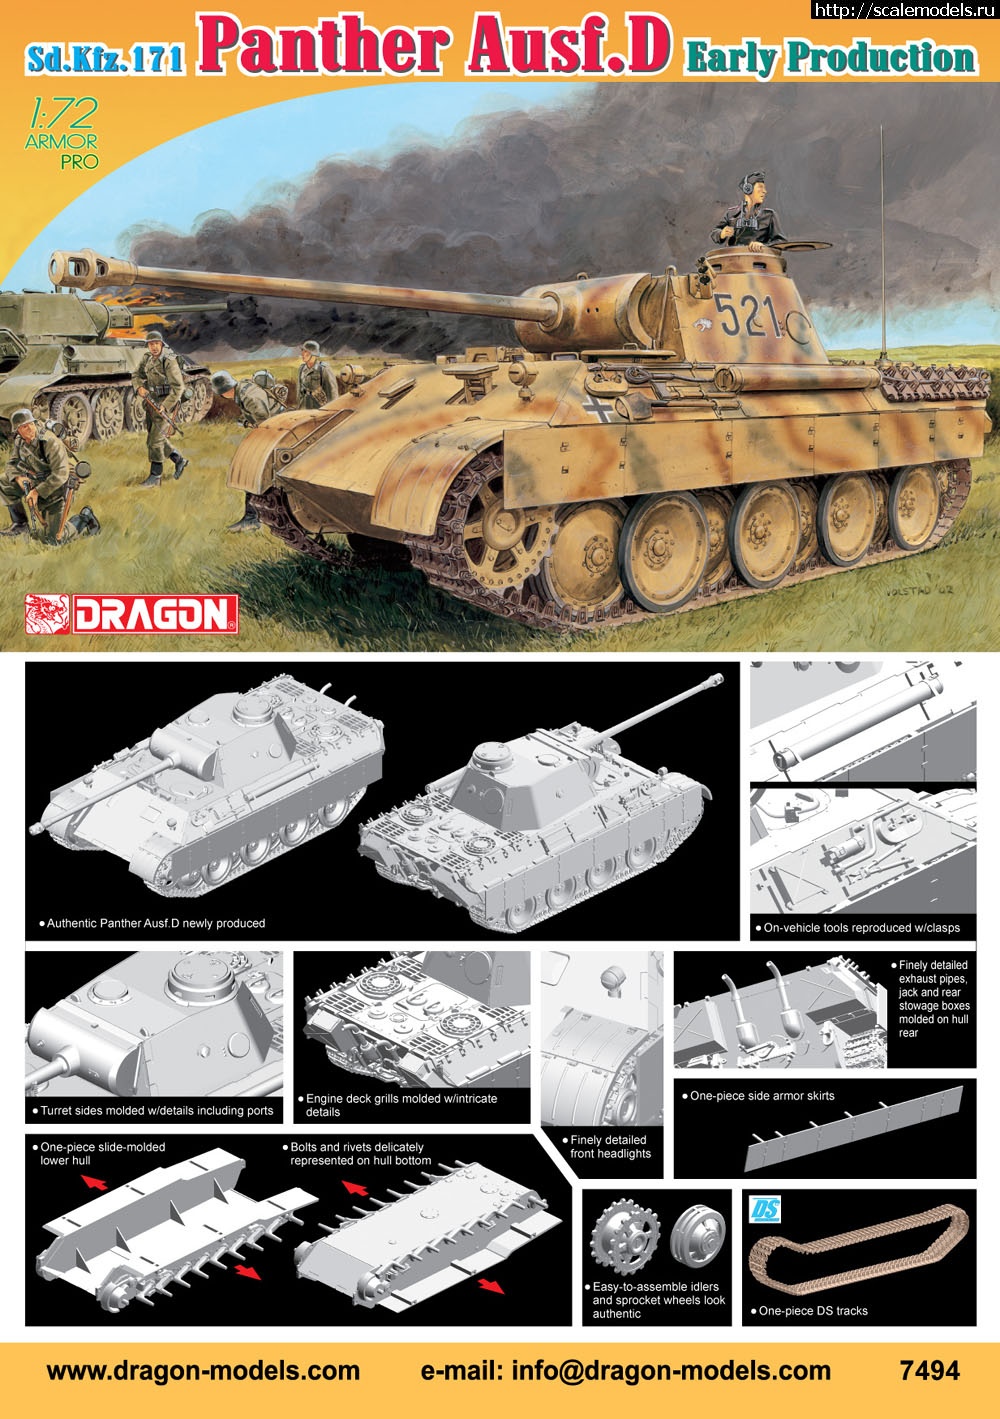 1330079935_7494poster.jpg :  Dragon: 1/72 Sd.Kfz.171 Panther Ausf.D Early Production   